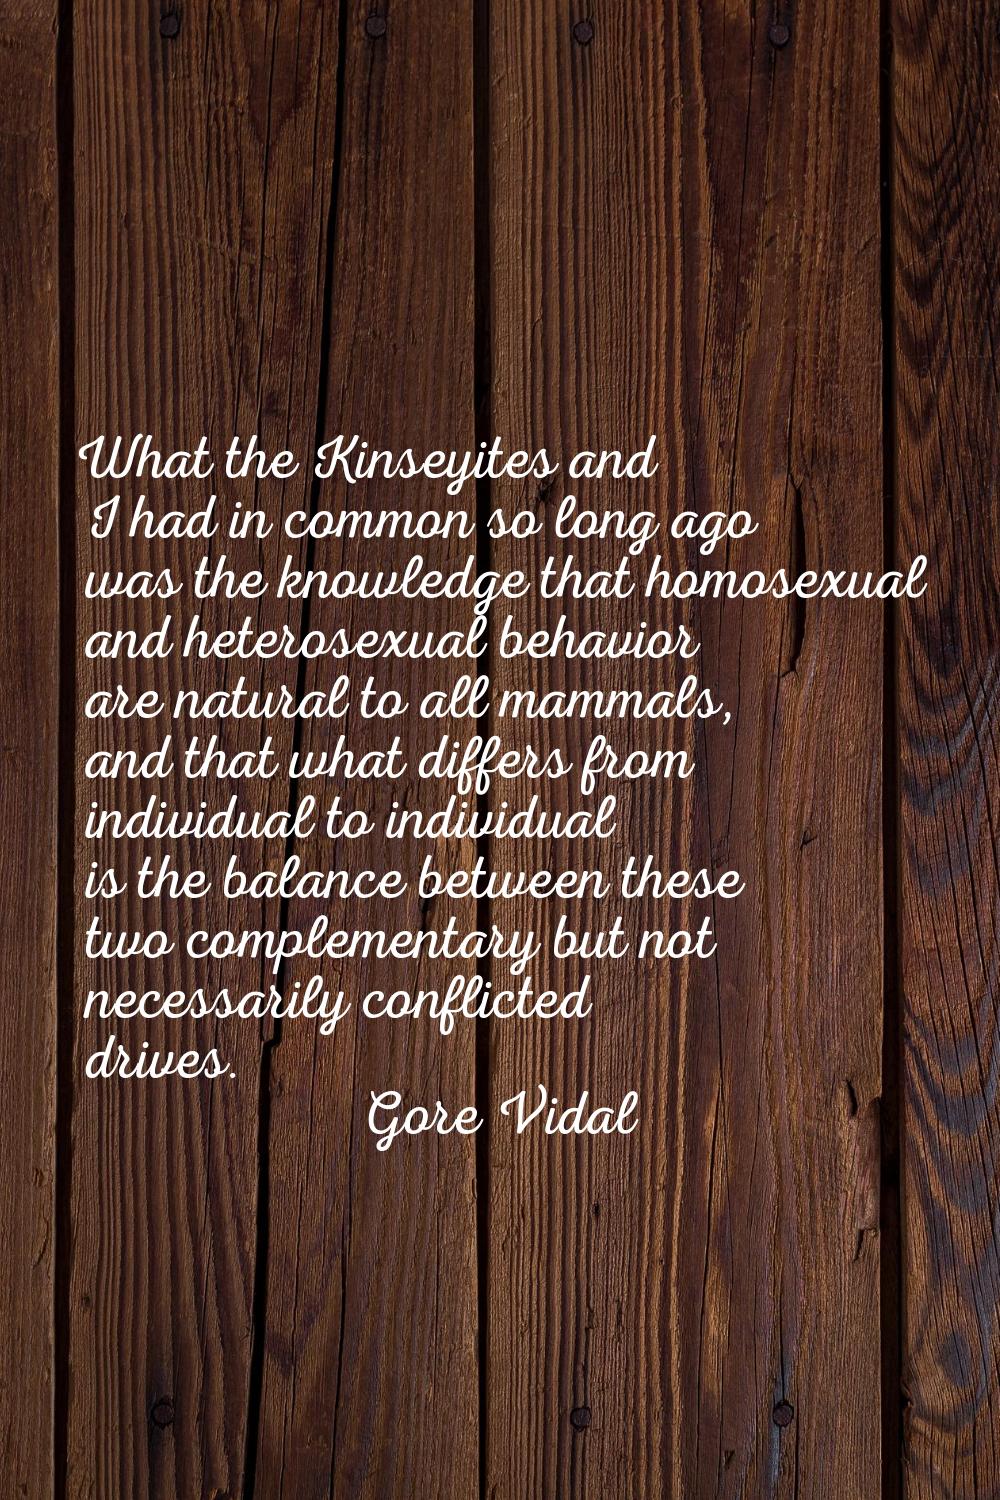 What the Kinseyites and I had in common so long ago was the knowledge that homosexual and heterosex